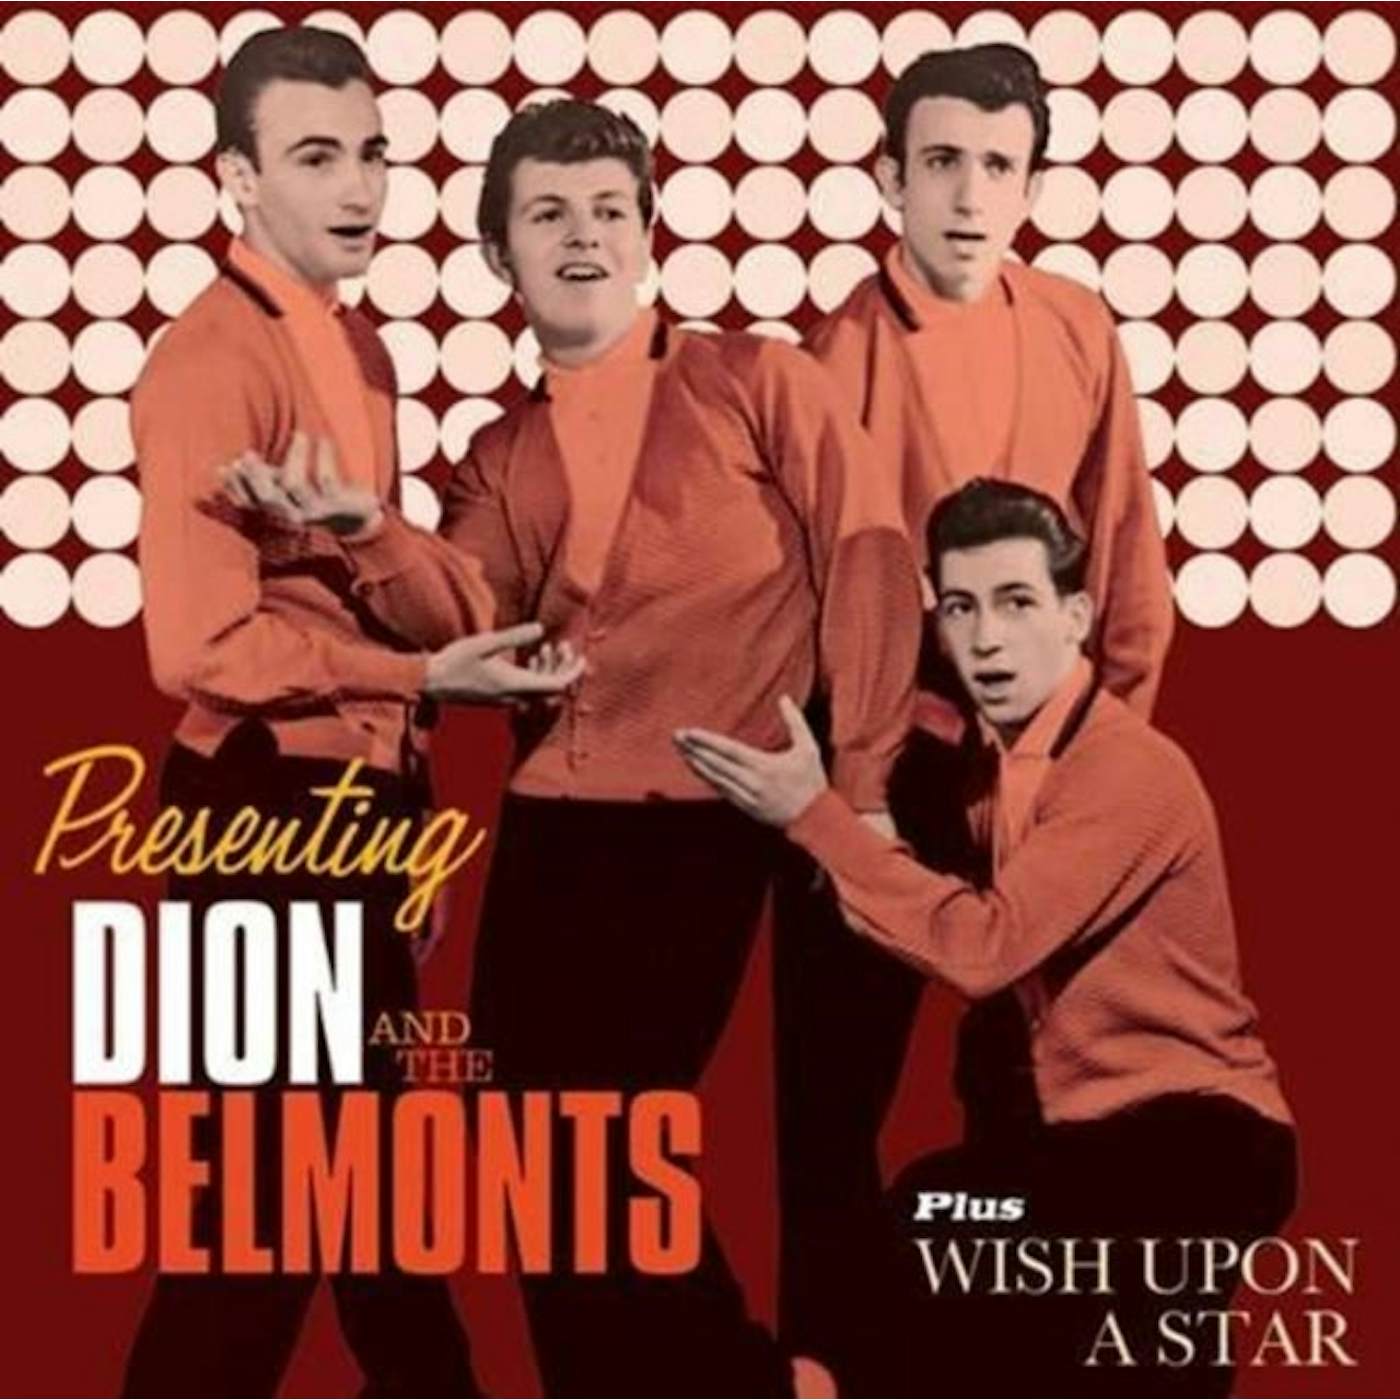 Dion & The Belmonts CD - Wish Upon A Star